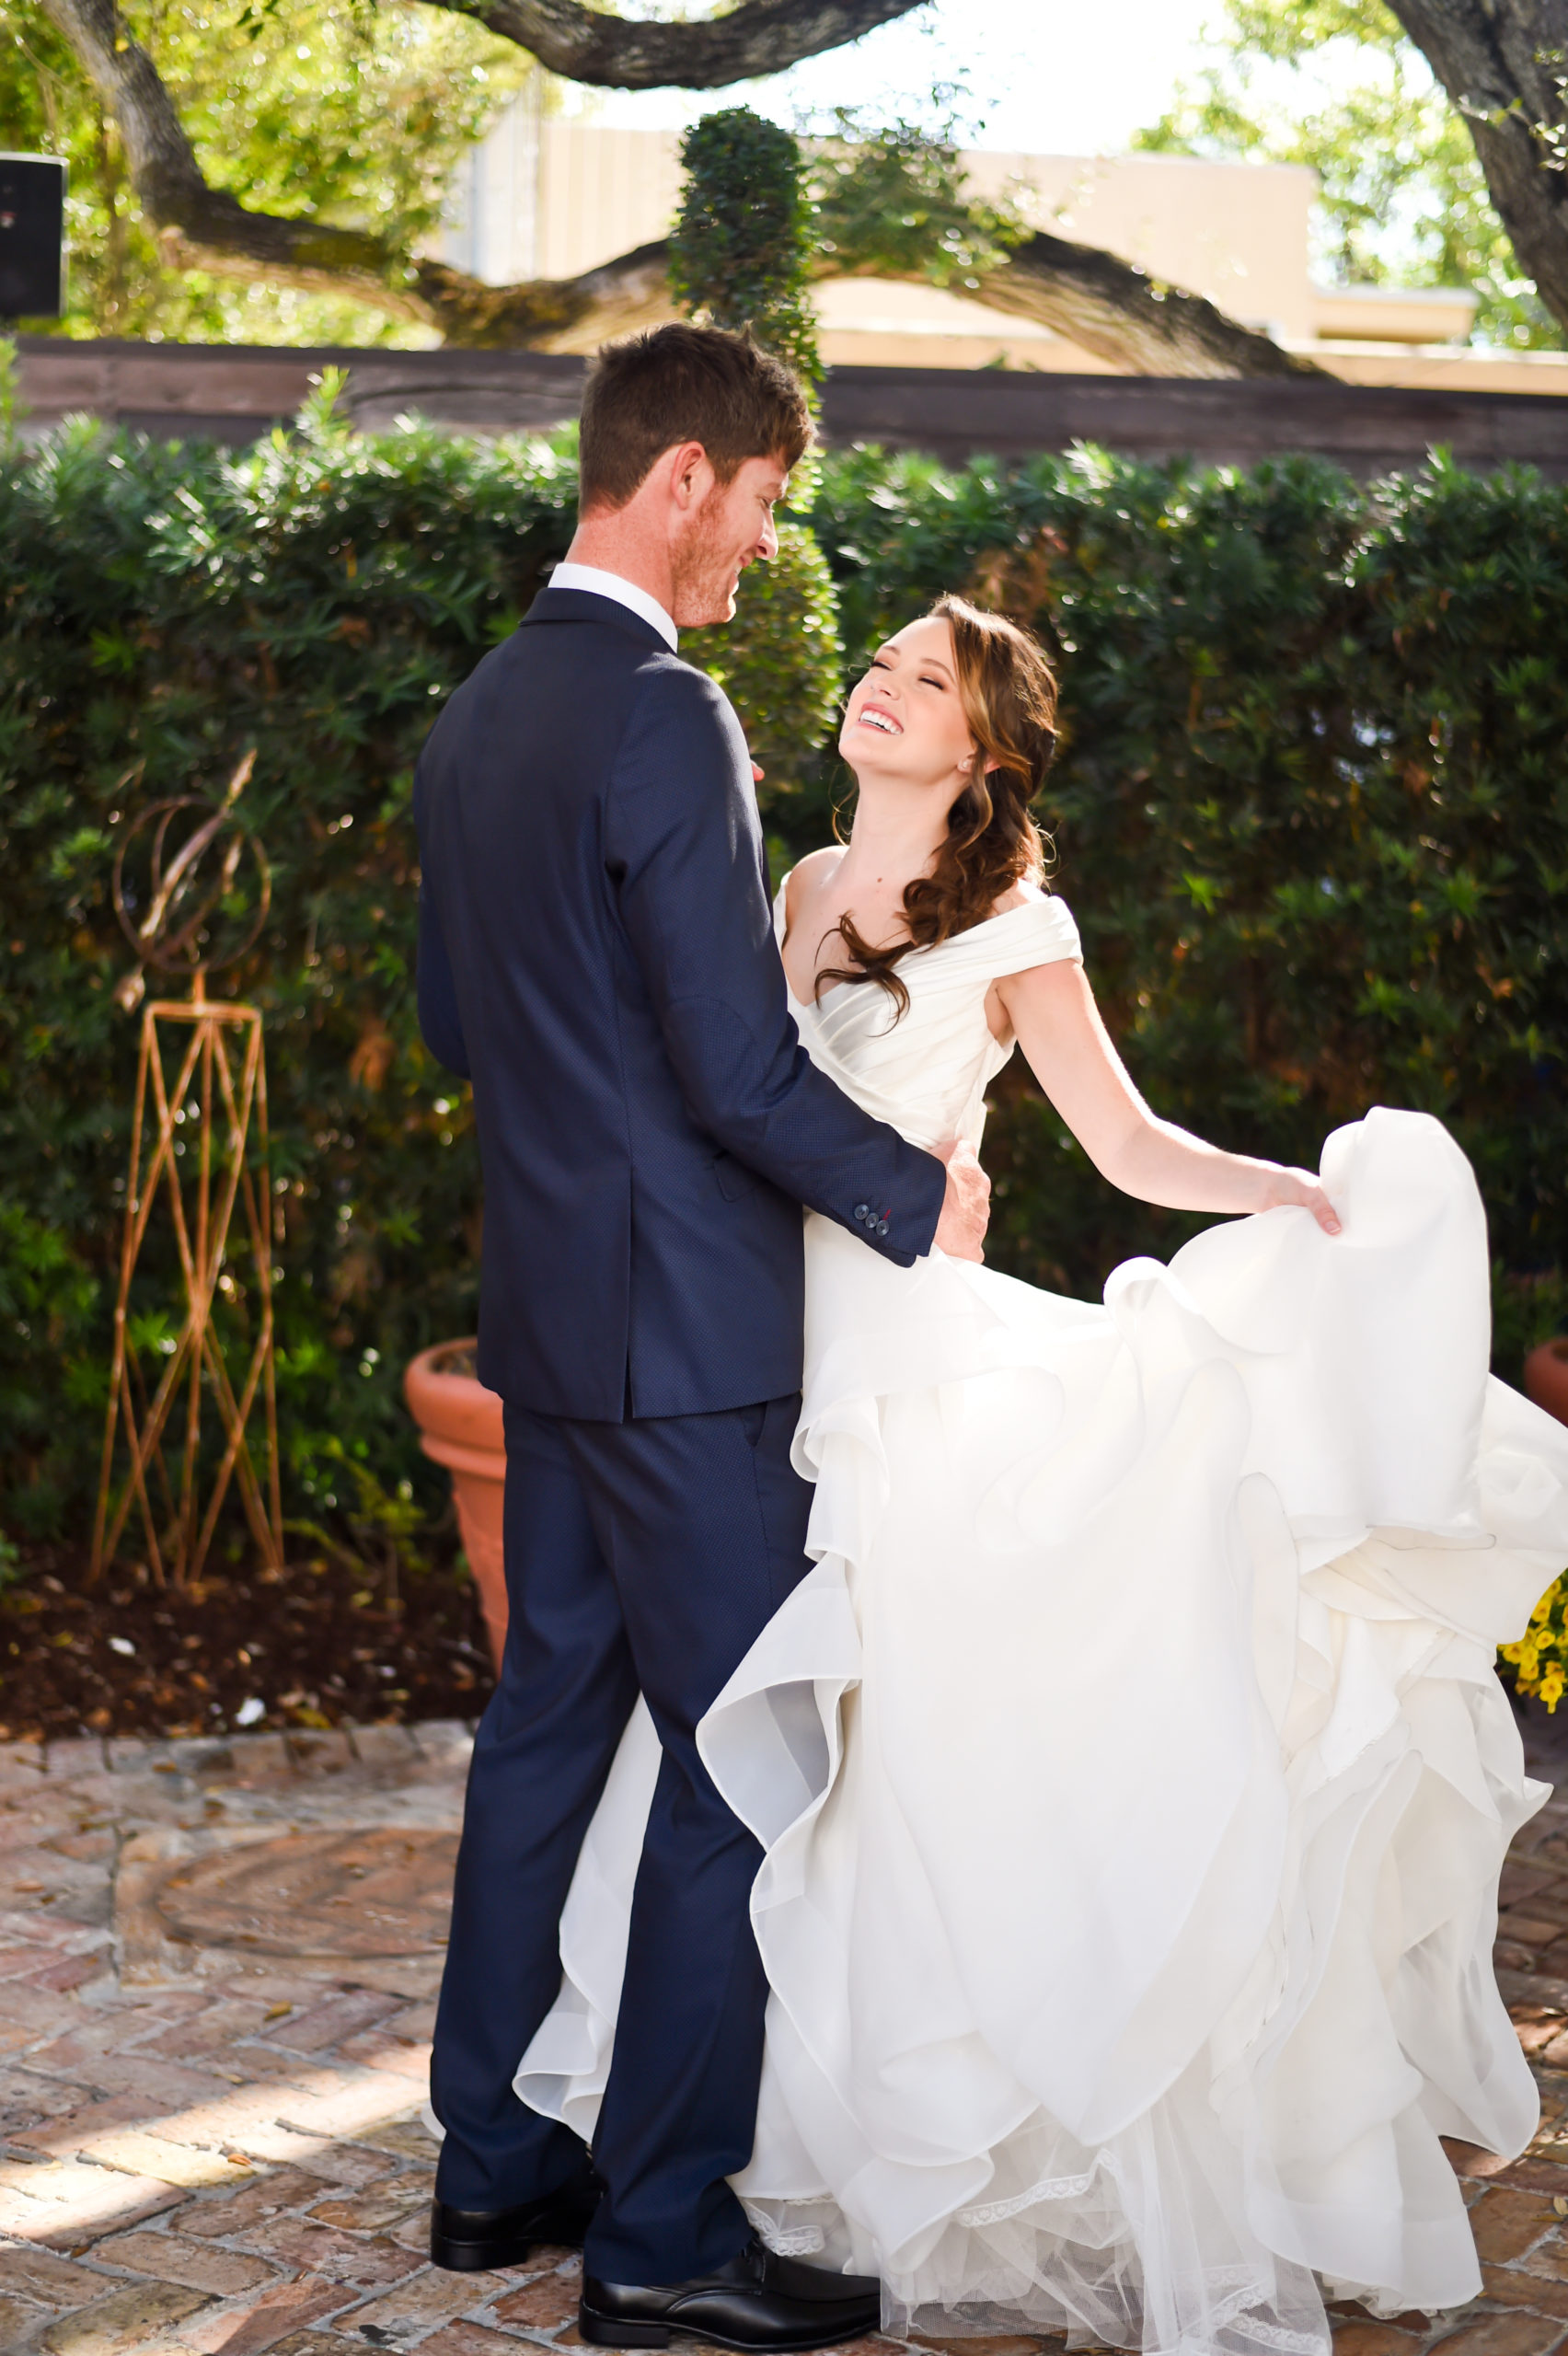 The Beauty and the Beast wedding would not be complete without a first dance in the courtyard at Louie Bossi